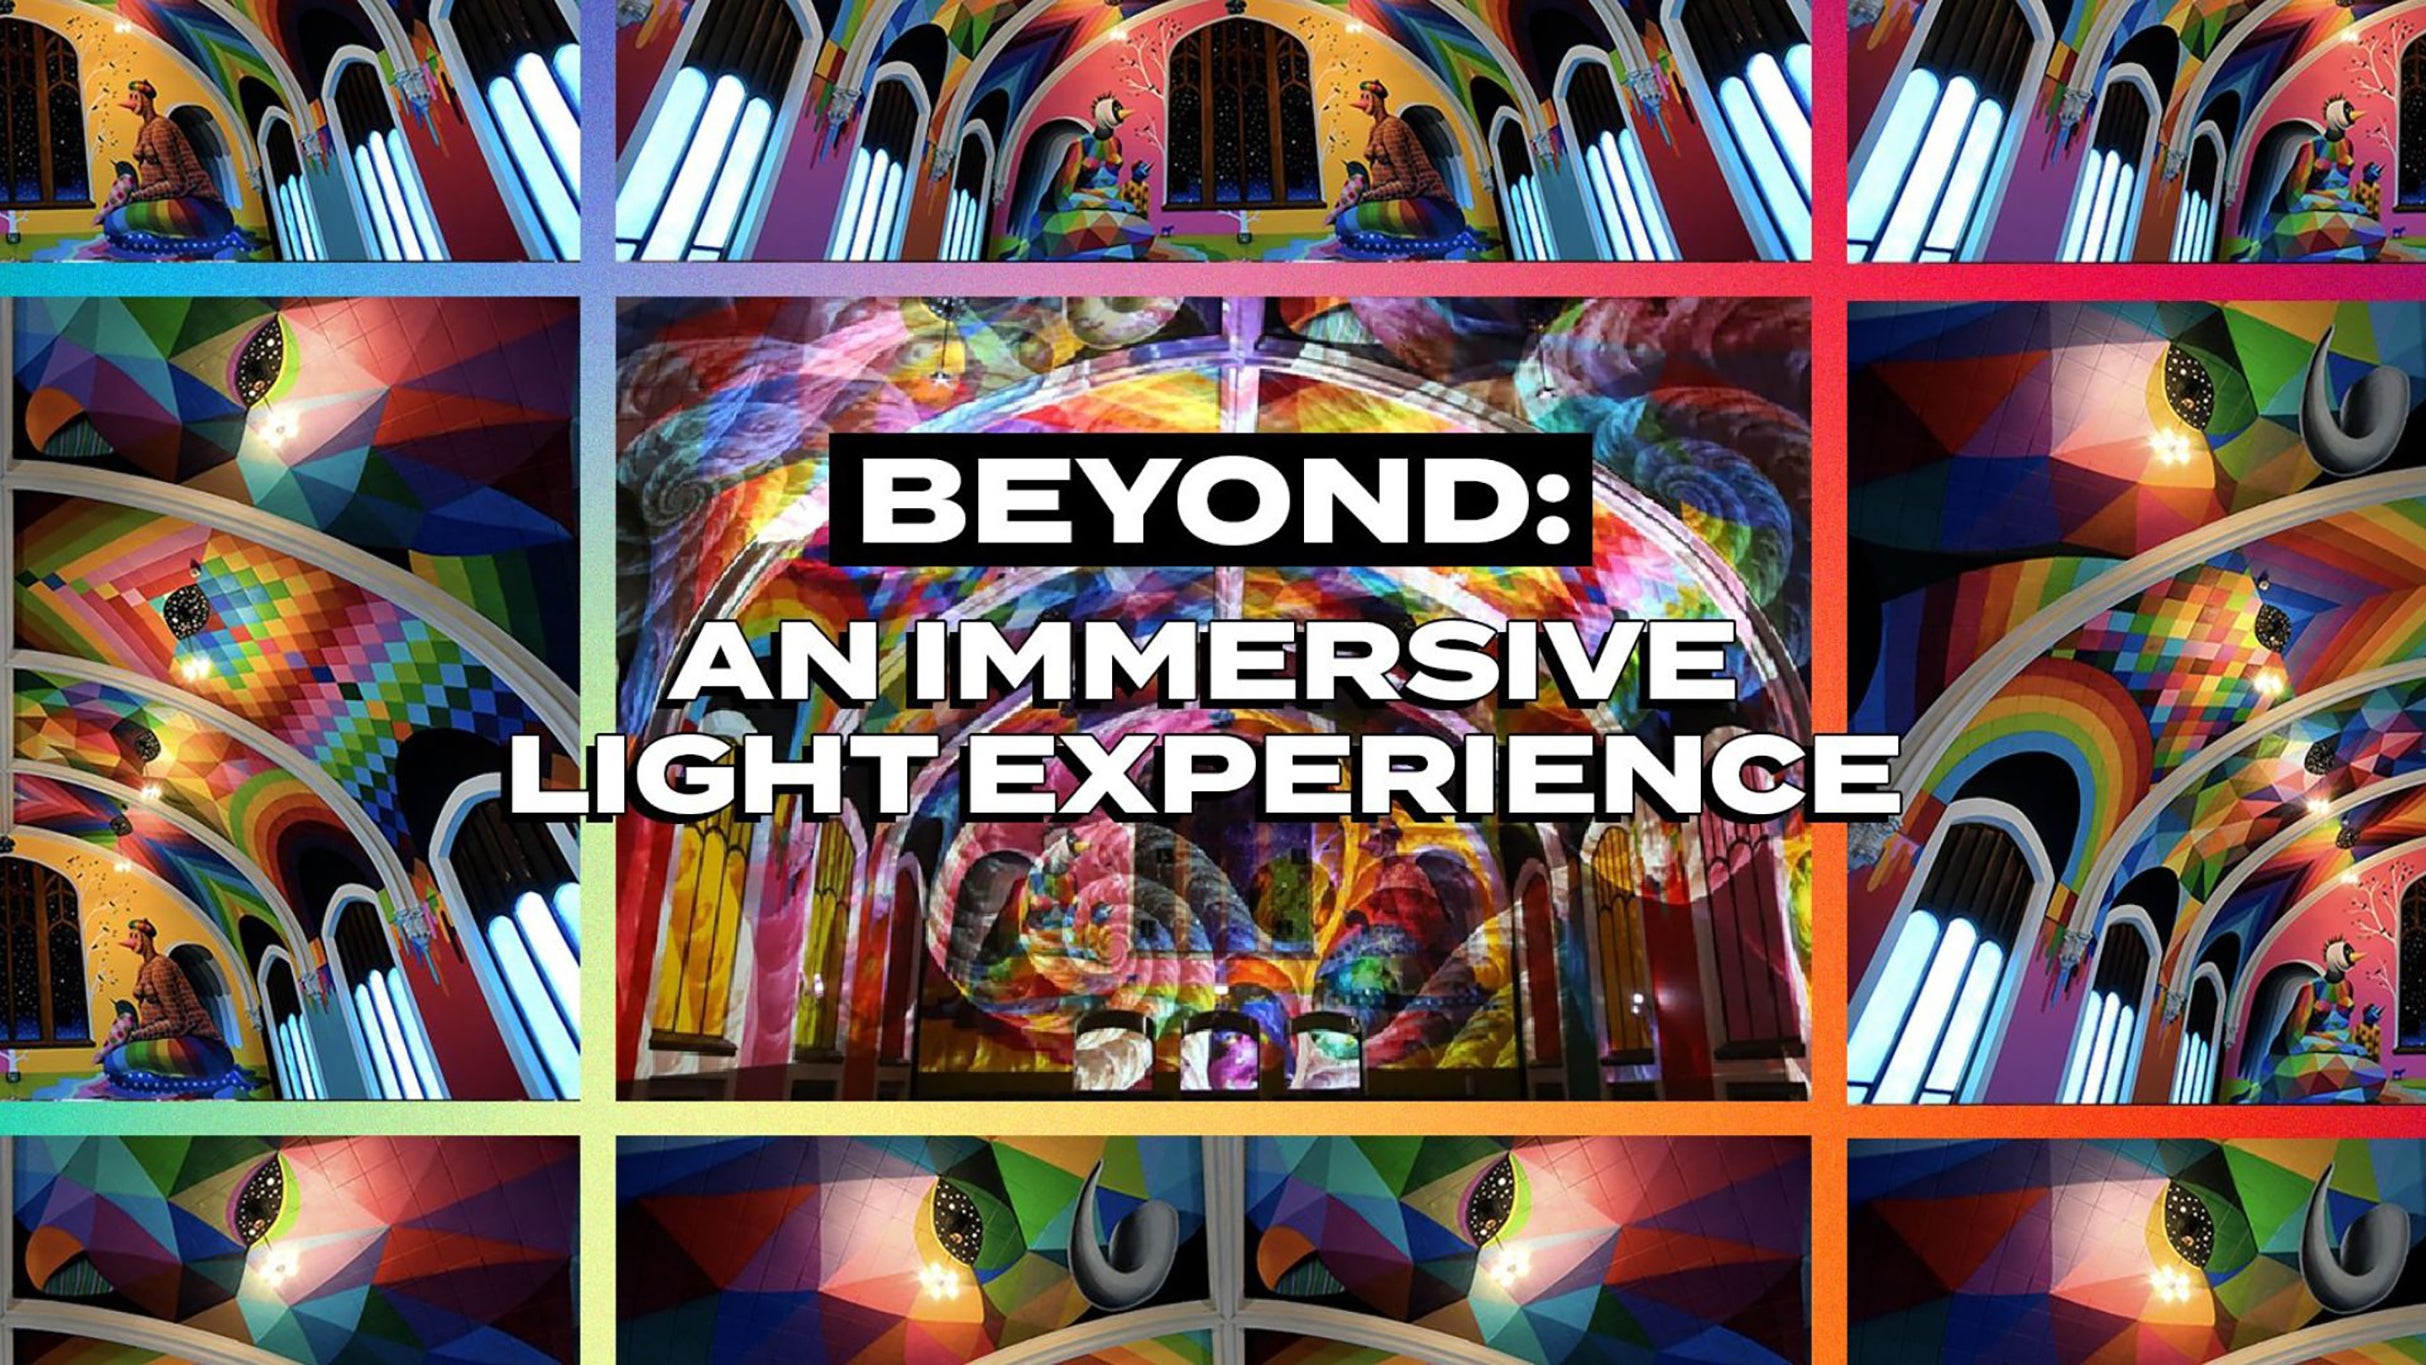 Beyond Laser Light Experience at